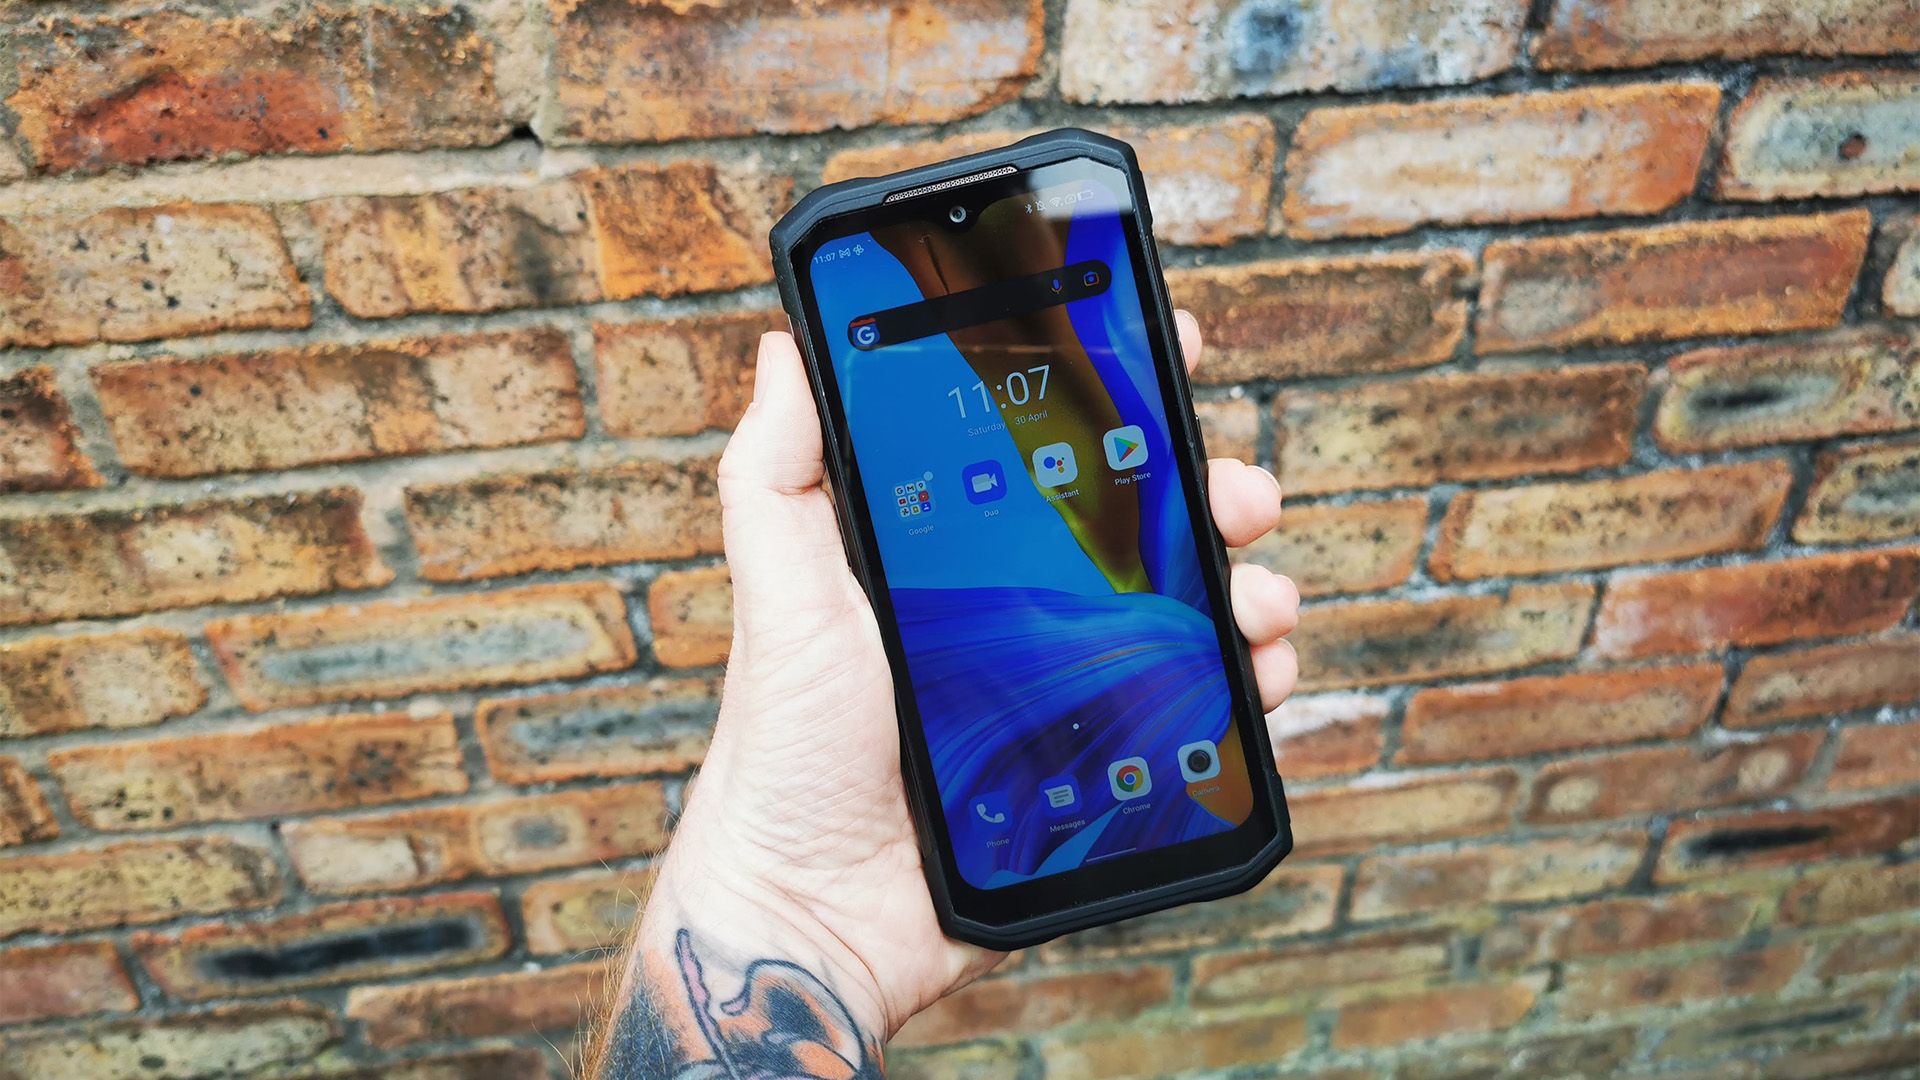 Doogee S98 Pro hands-on: The S98 gets a thermal camera and loses